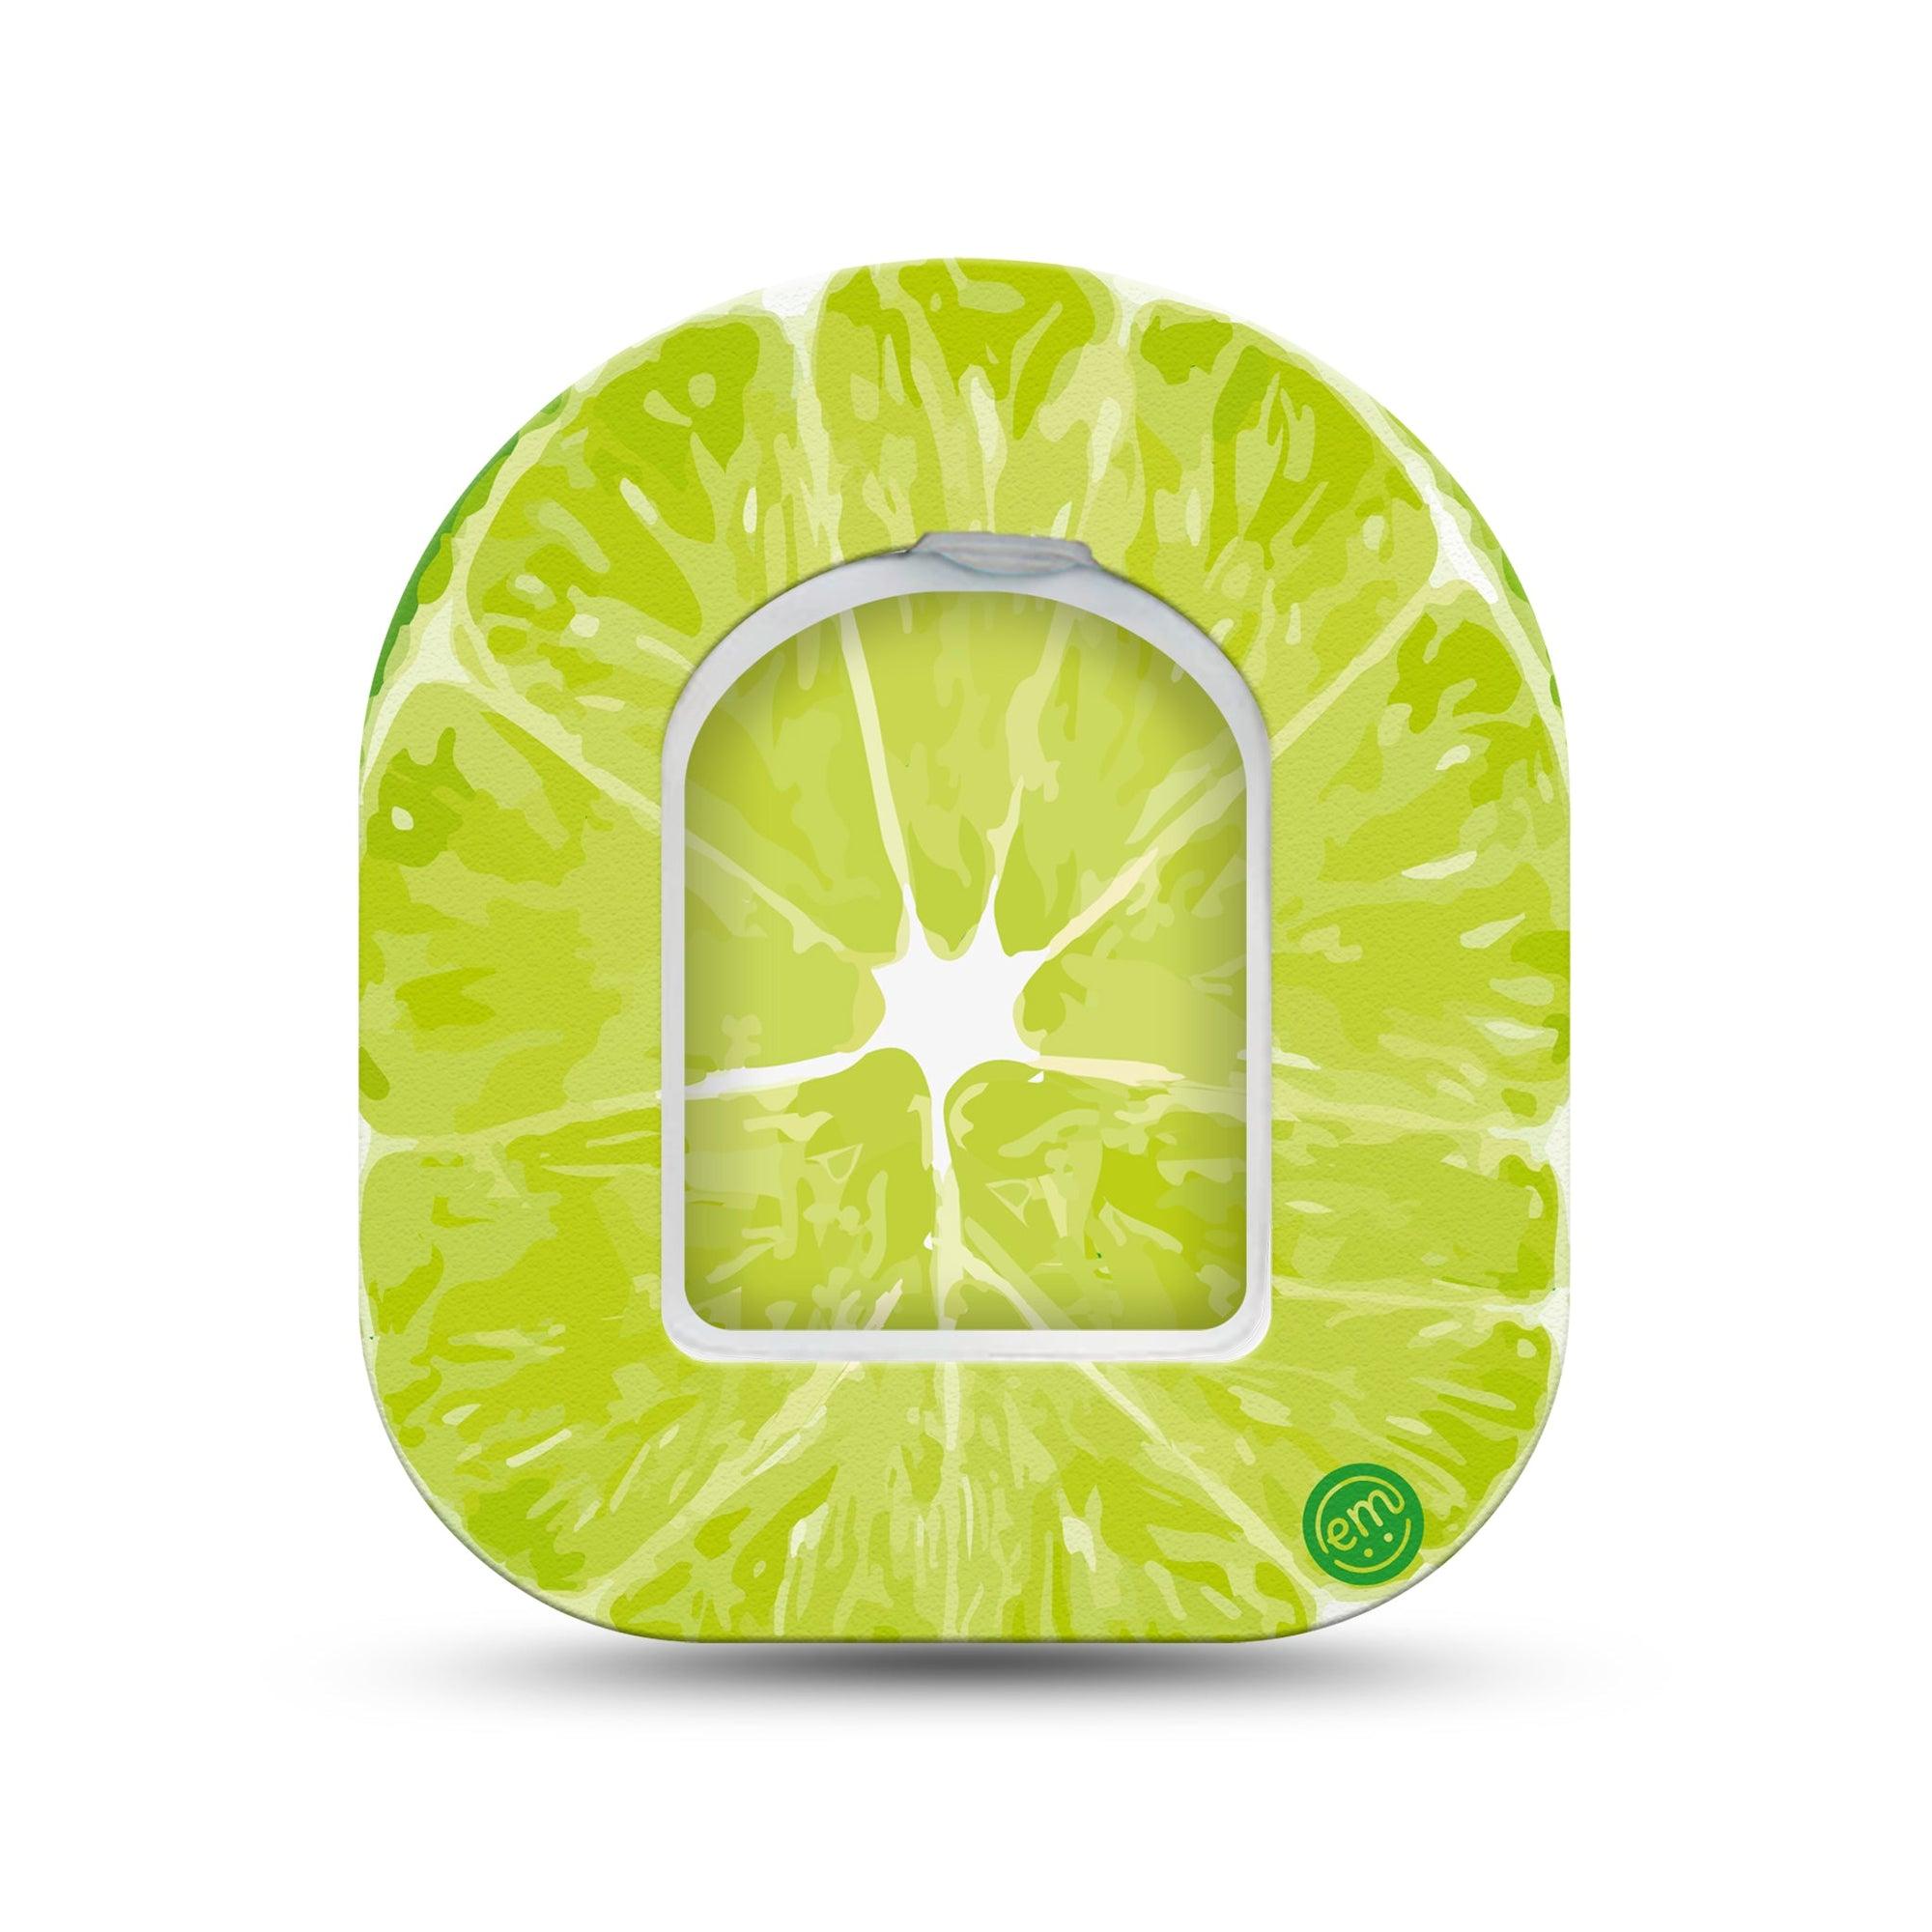 ExpressionMed Lime Omnipod Surface Center Sticker and Mini Tape Sliced Lime Themed Vinyl Sticker and Tape Design Pump Design